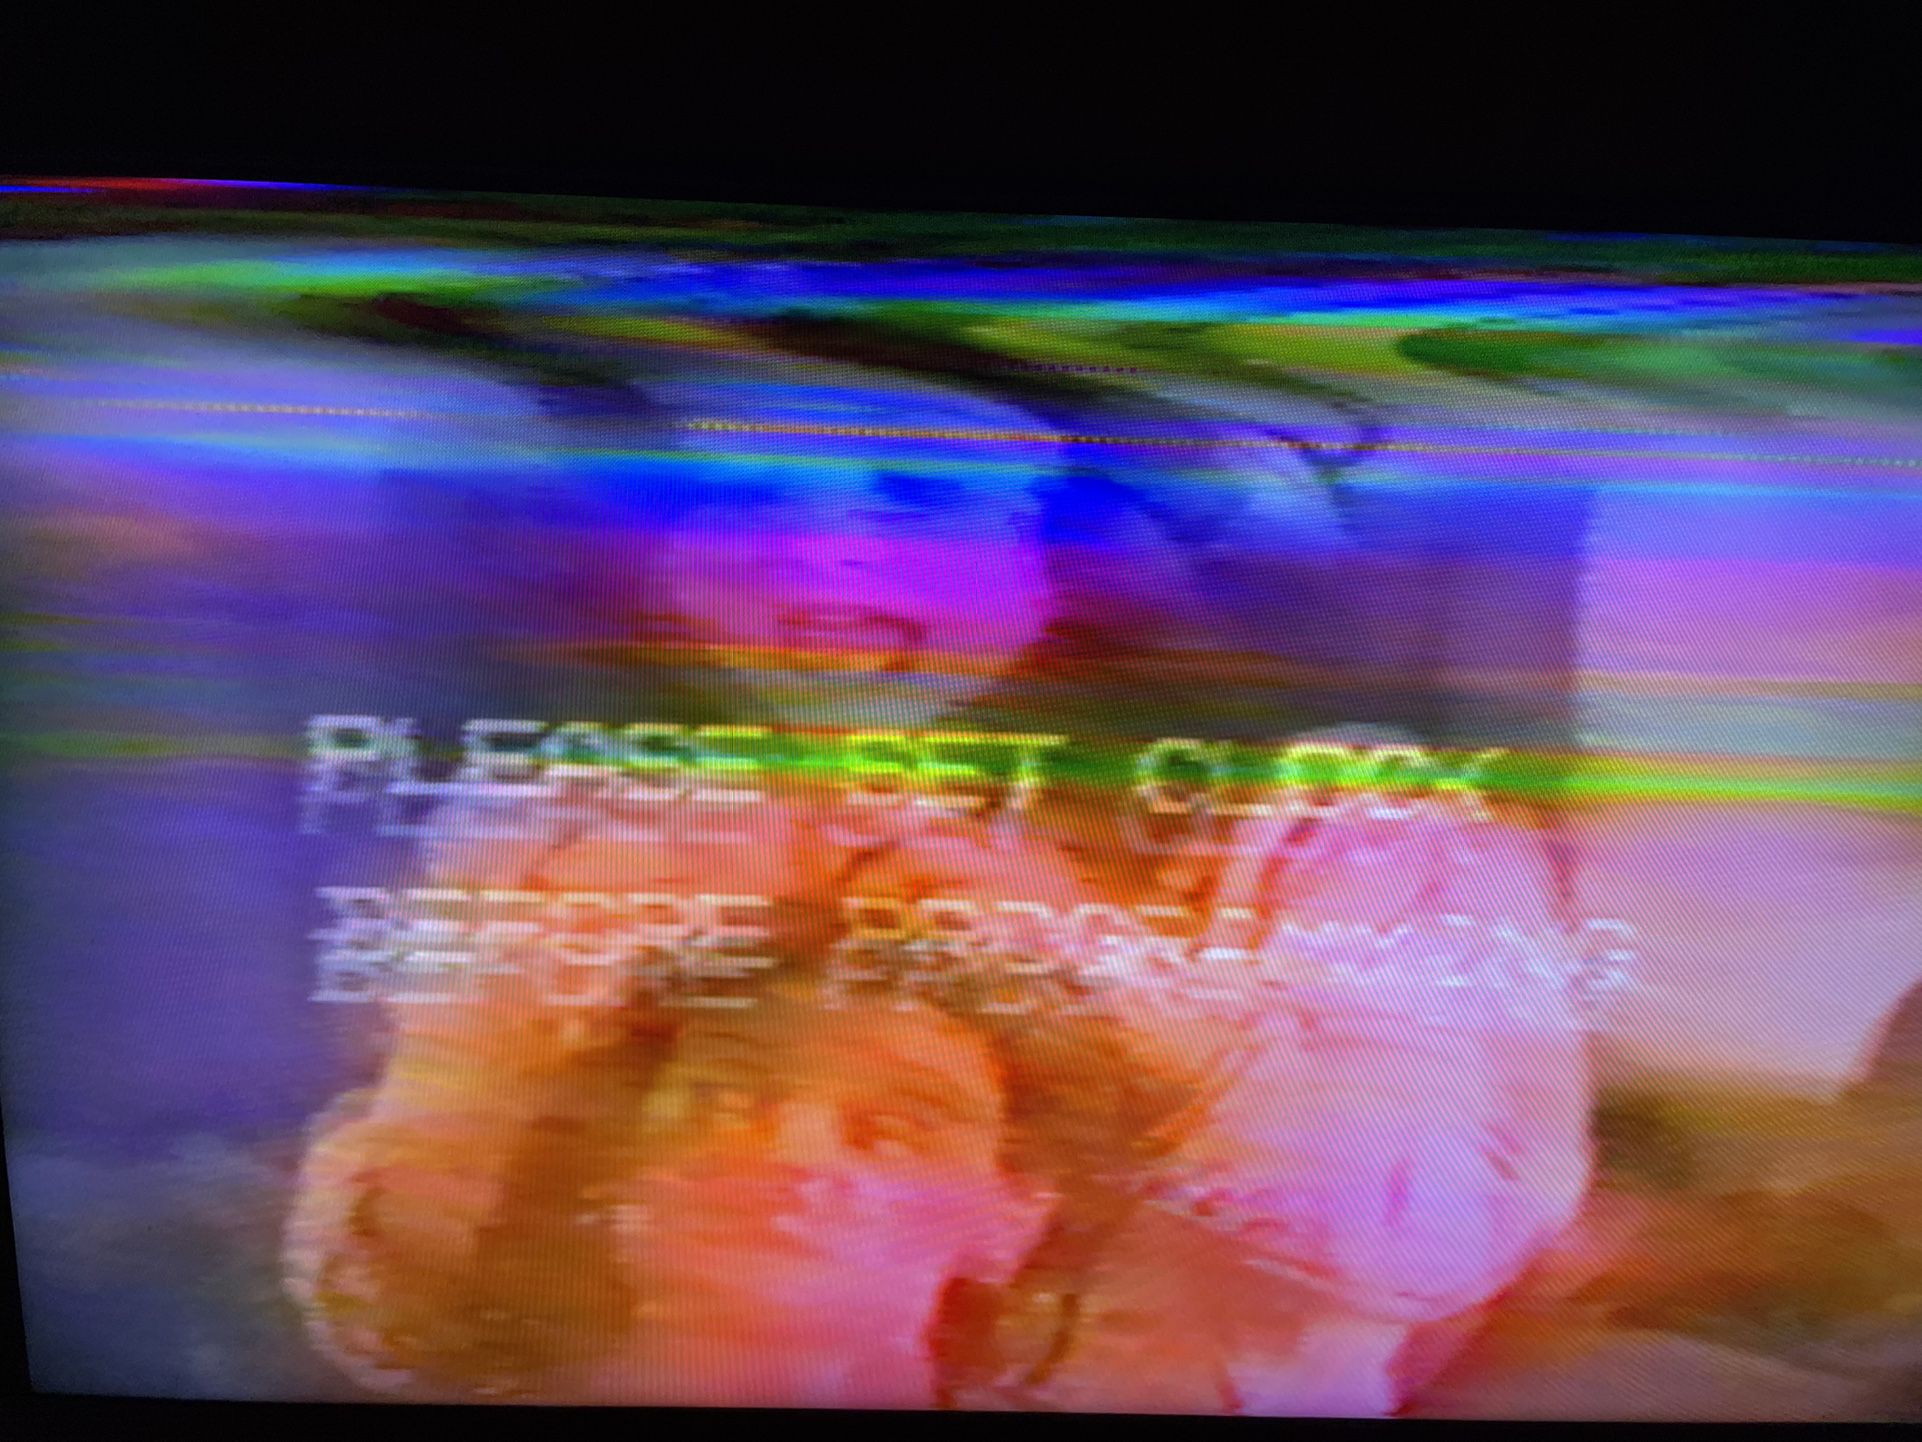 EXPERIMENTAL VHS CASSETTE TAPES AMBIENT FREAKOUT PSYCH-ASONIC VIDEO GAME CRT TV TUBE TELE